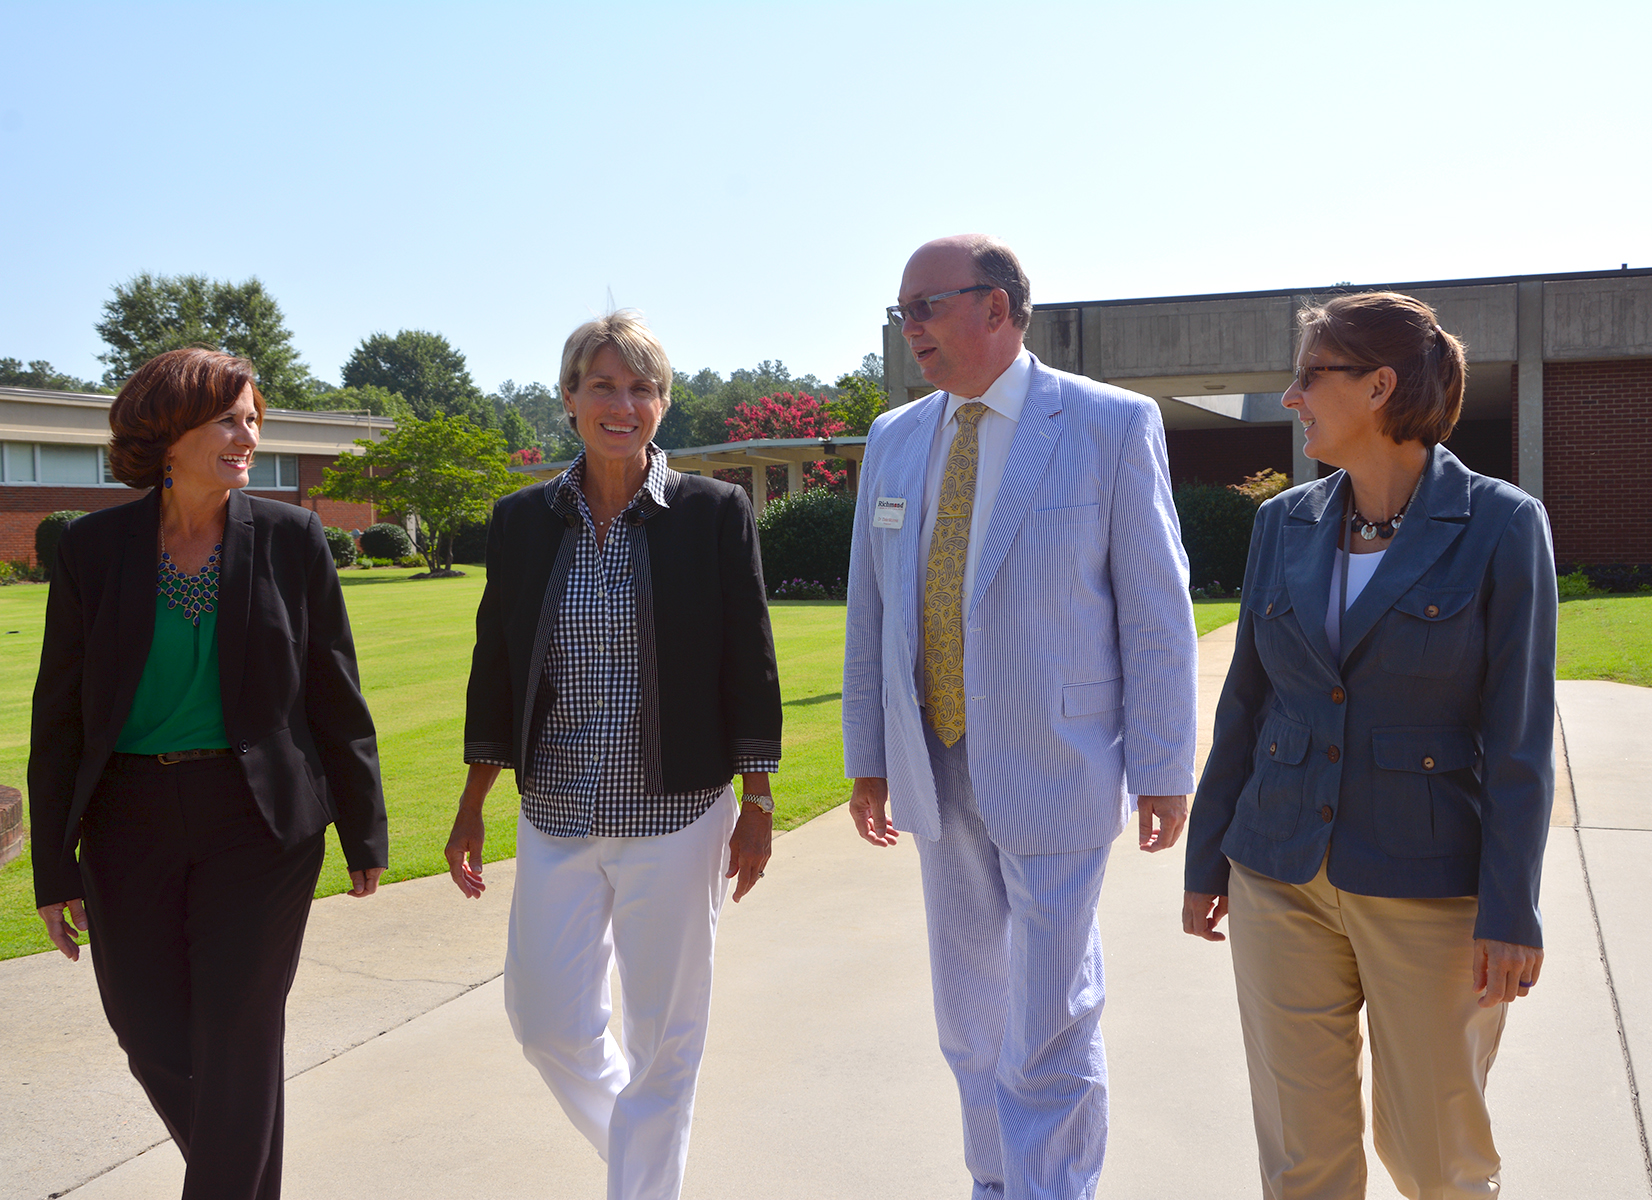 Pictured walking across campus at Richmond Community College are, from left to right, Kelly DeLong, director of K-12 Math and Science; Dr. Cindy Goodman, superintendent for Richmond County Schools; Dr. Dale McInnis, RCC president; and Cynthia Reeves, RCC’s associate dean of Institutional Effectiveness and Improvement. RCC and Richmond County Schools recently received a $750,000 grant from the Golden LEAF Foundation.